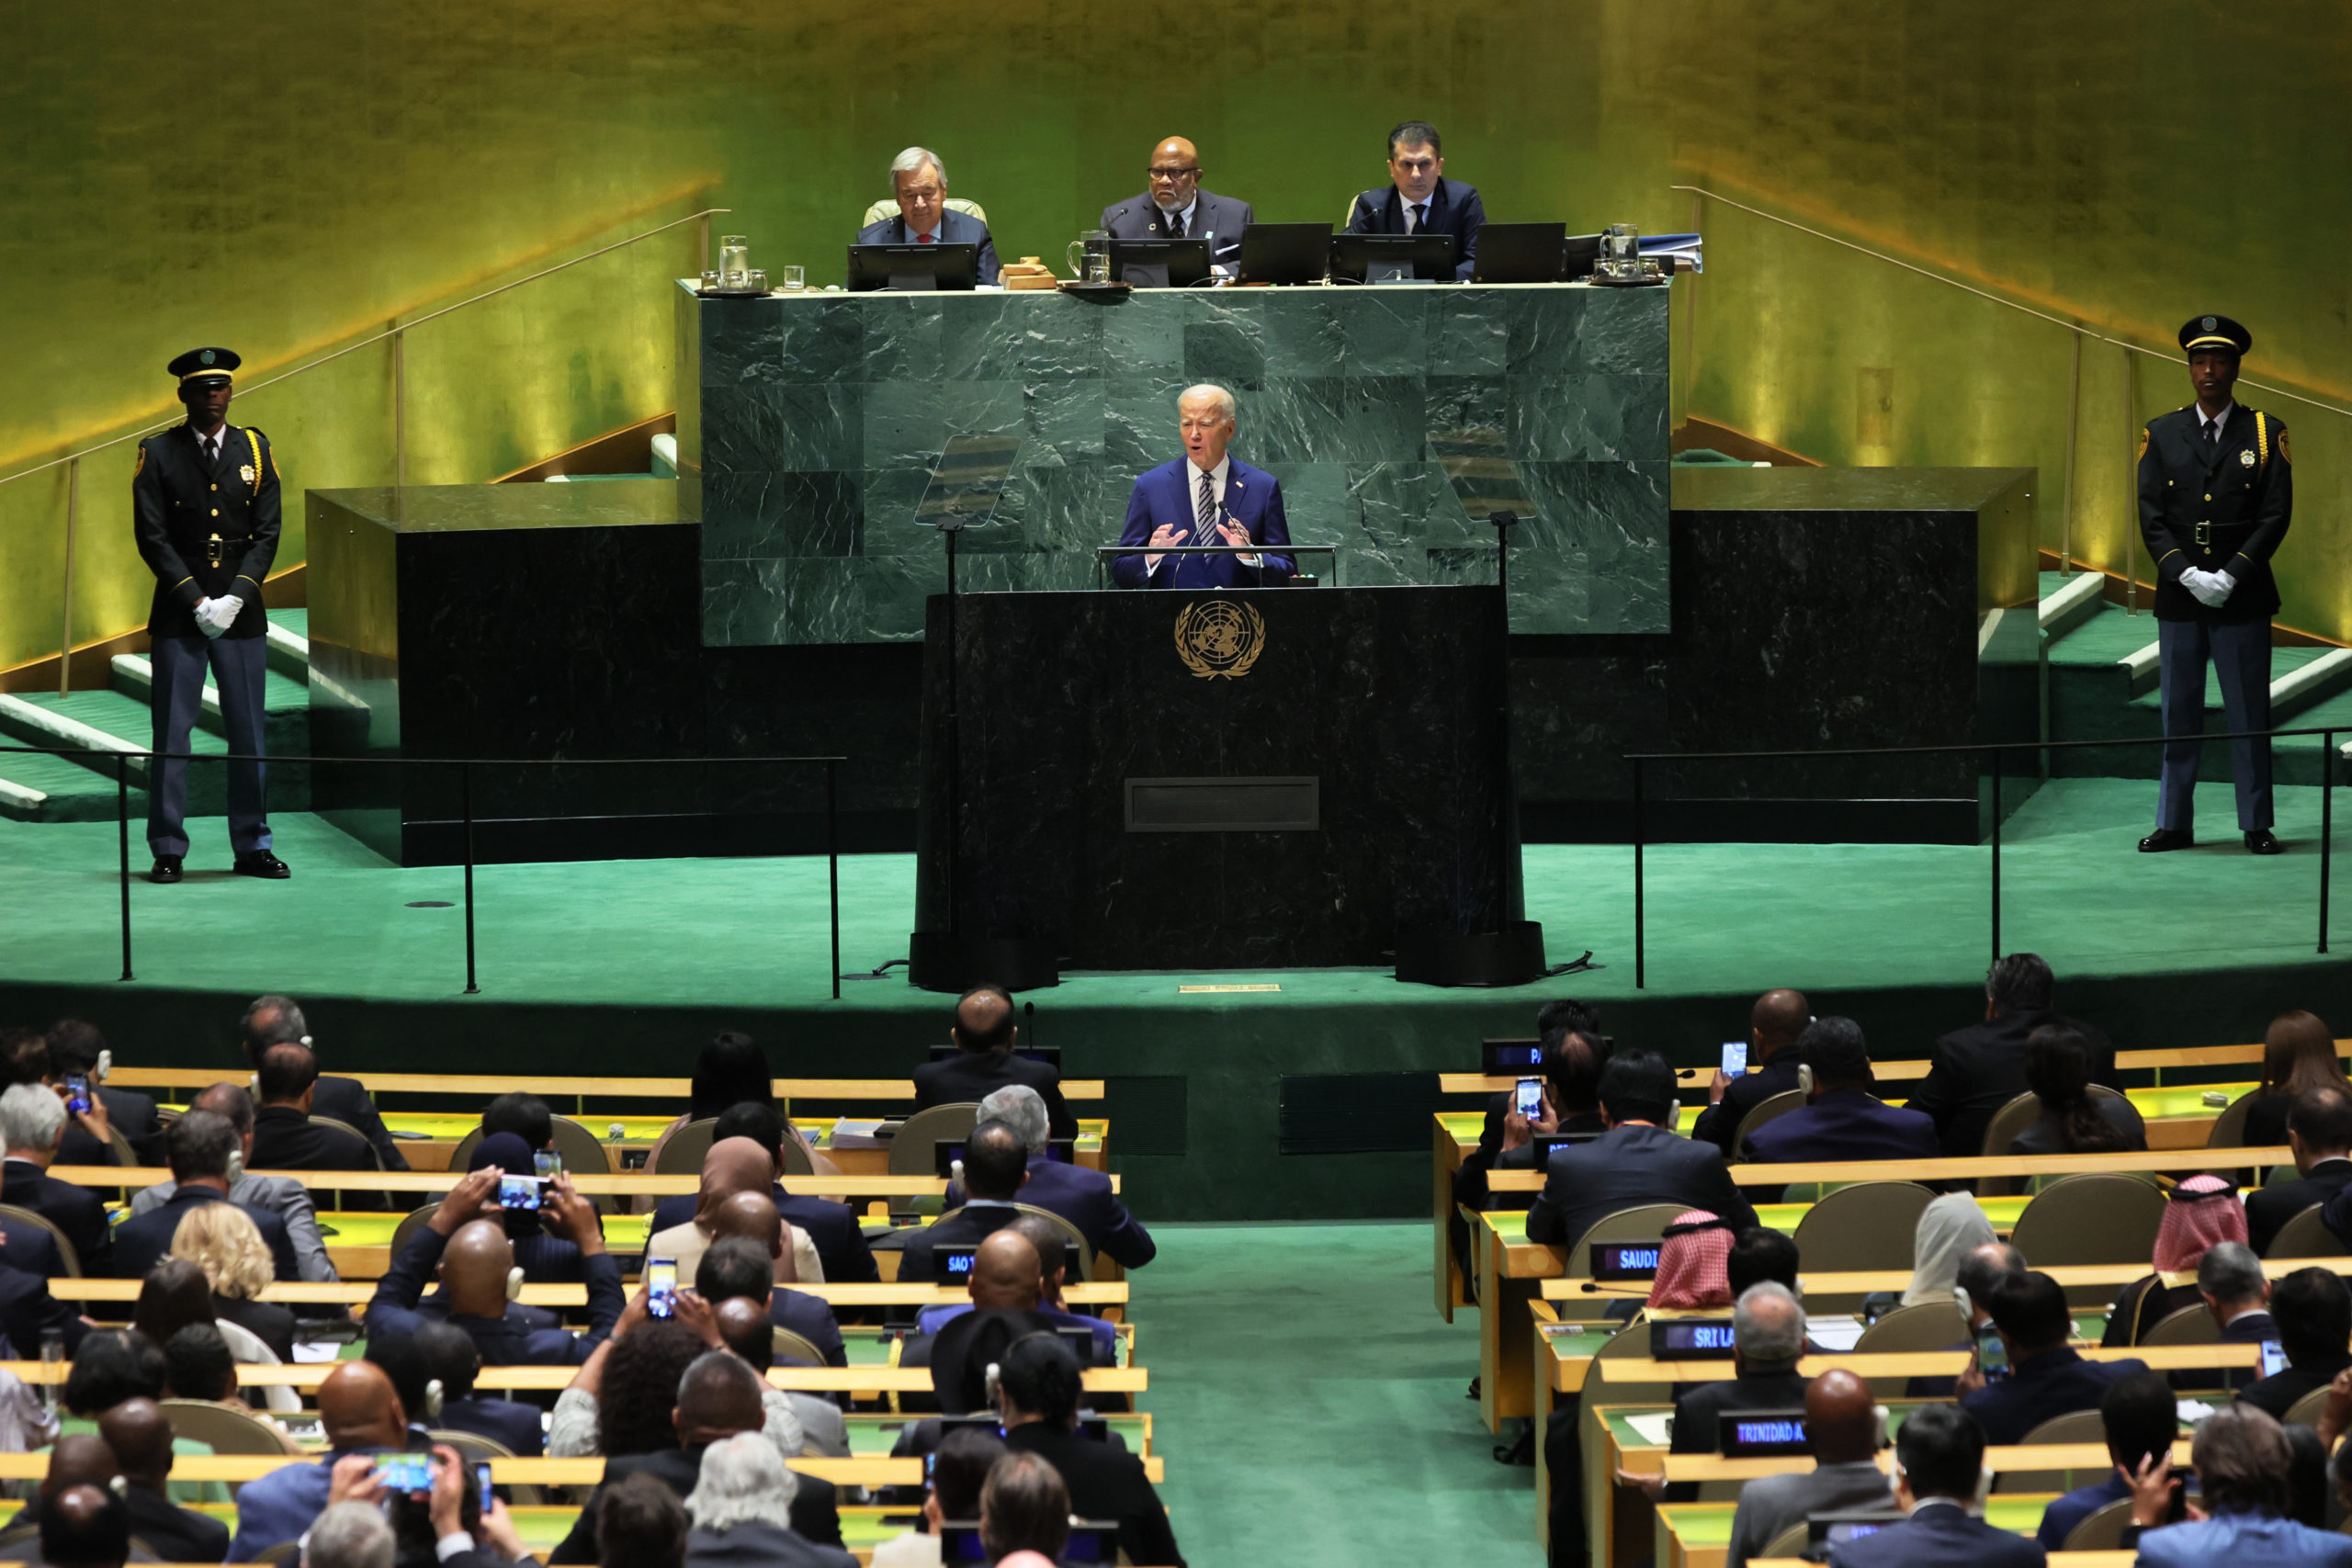 U.S. President Joe Biden speaks during the United Nations General Assembly (UNGA) at the United Nations headquarters on September 19, 2023 in New York City. Heads of states and governments from at least 145 countries are gathered for the 78th UNGA session amid the ongoing war in Ukraine and natural disasters such as earthquakes, floods and fires around the globe. (Photo by Michael M. Santiago/Getty Images)